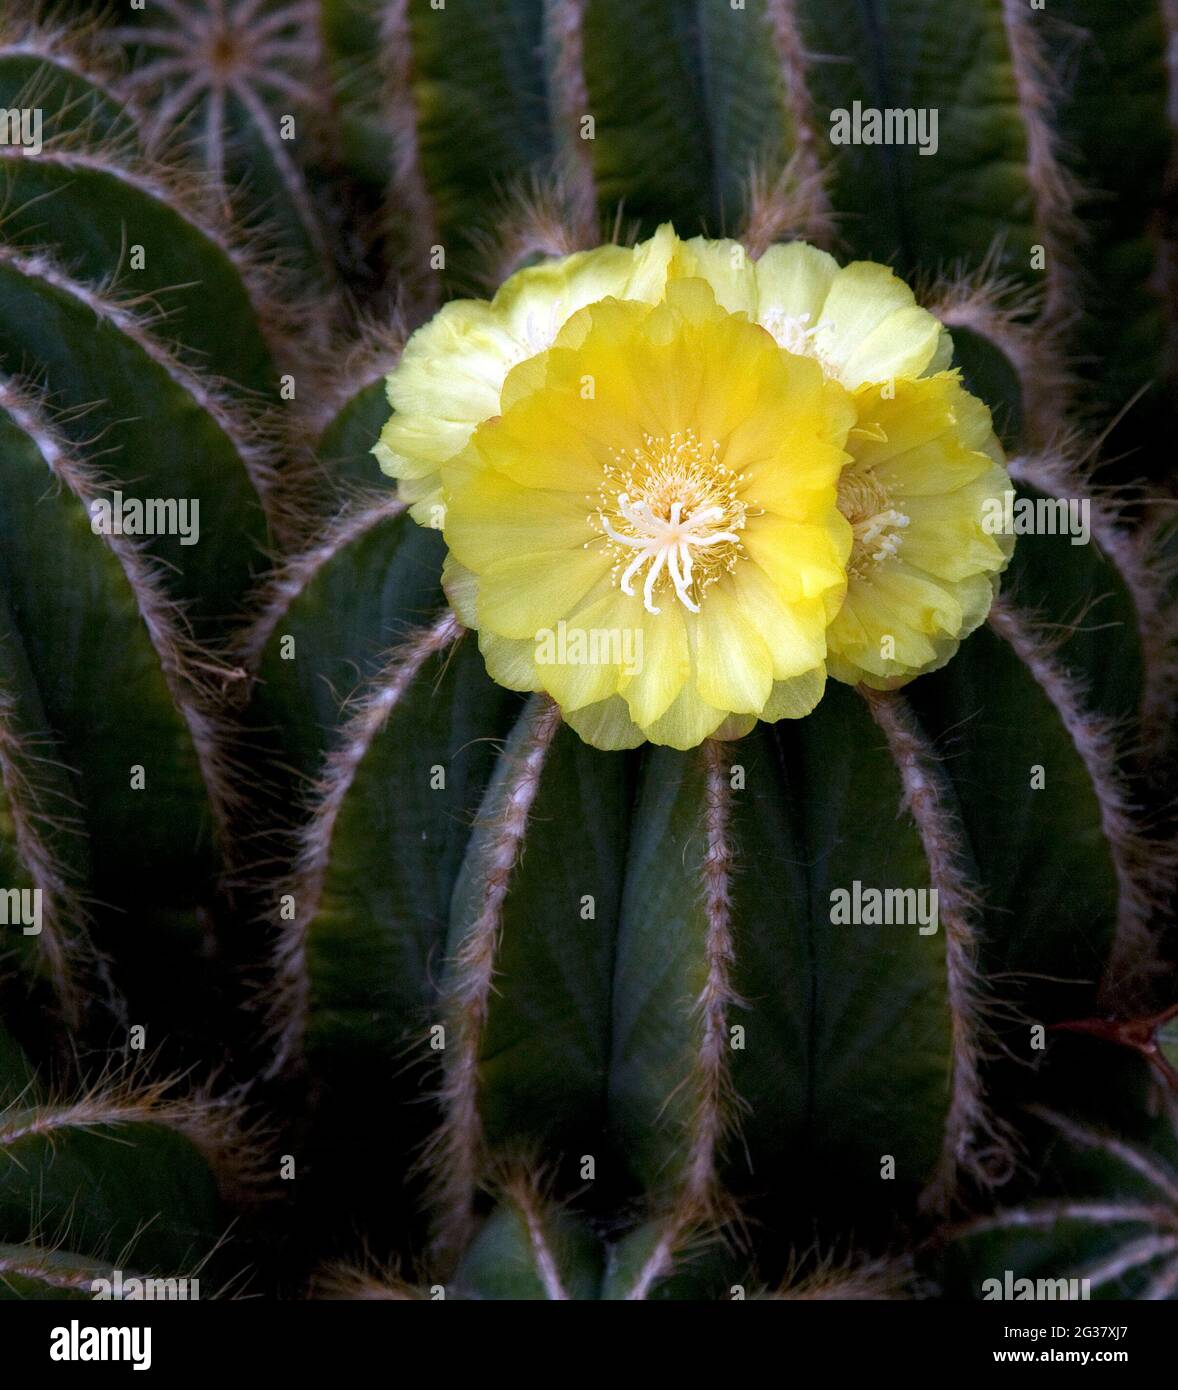 Close up image of a Parodia Magnifica plant or Rounded Ball cactus Stock Photo